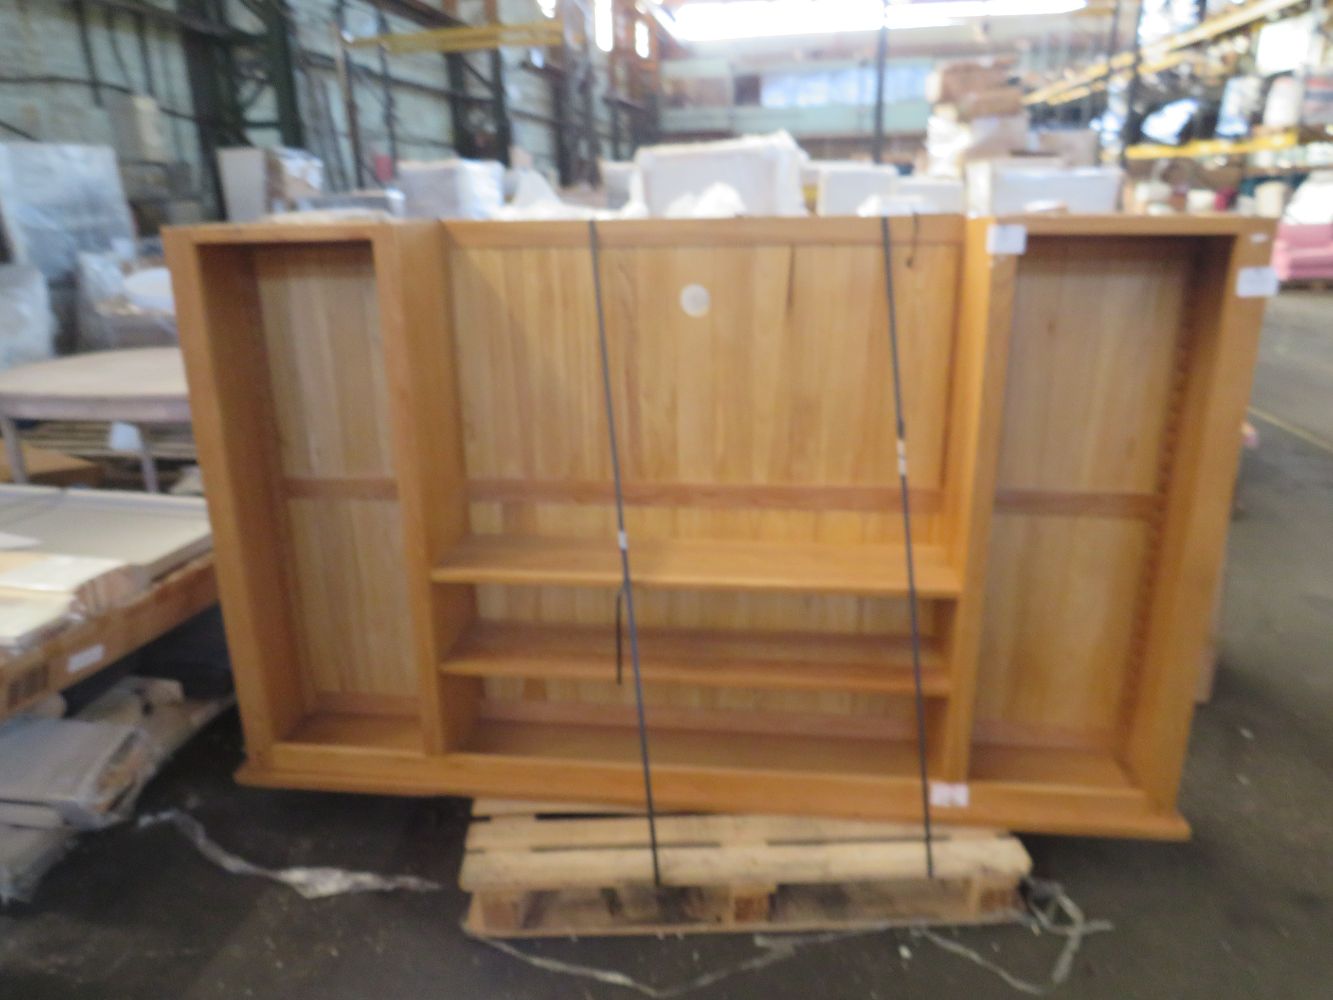 Pallets of BER Furniture and sofas from Swoon, Cotswold, oak Furniture Land and more